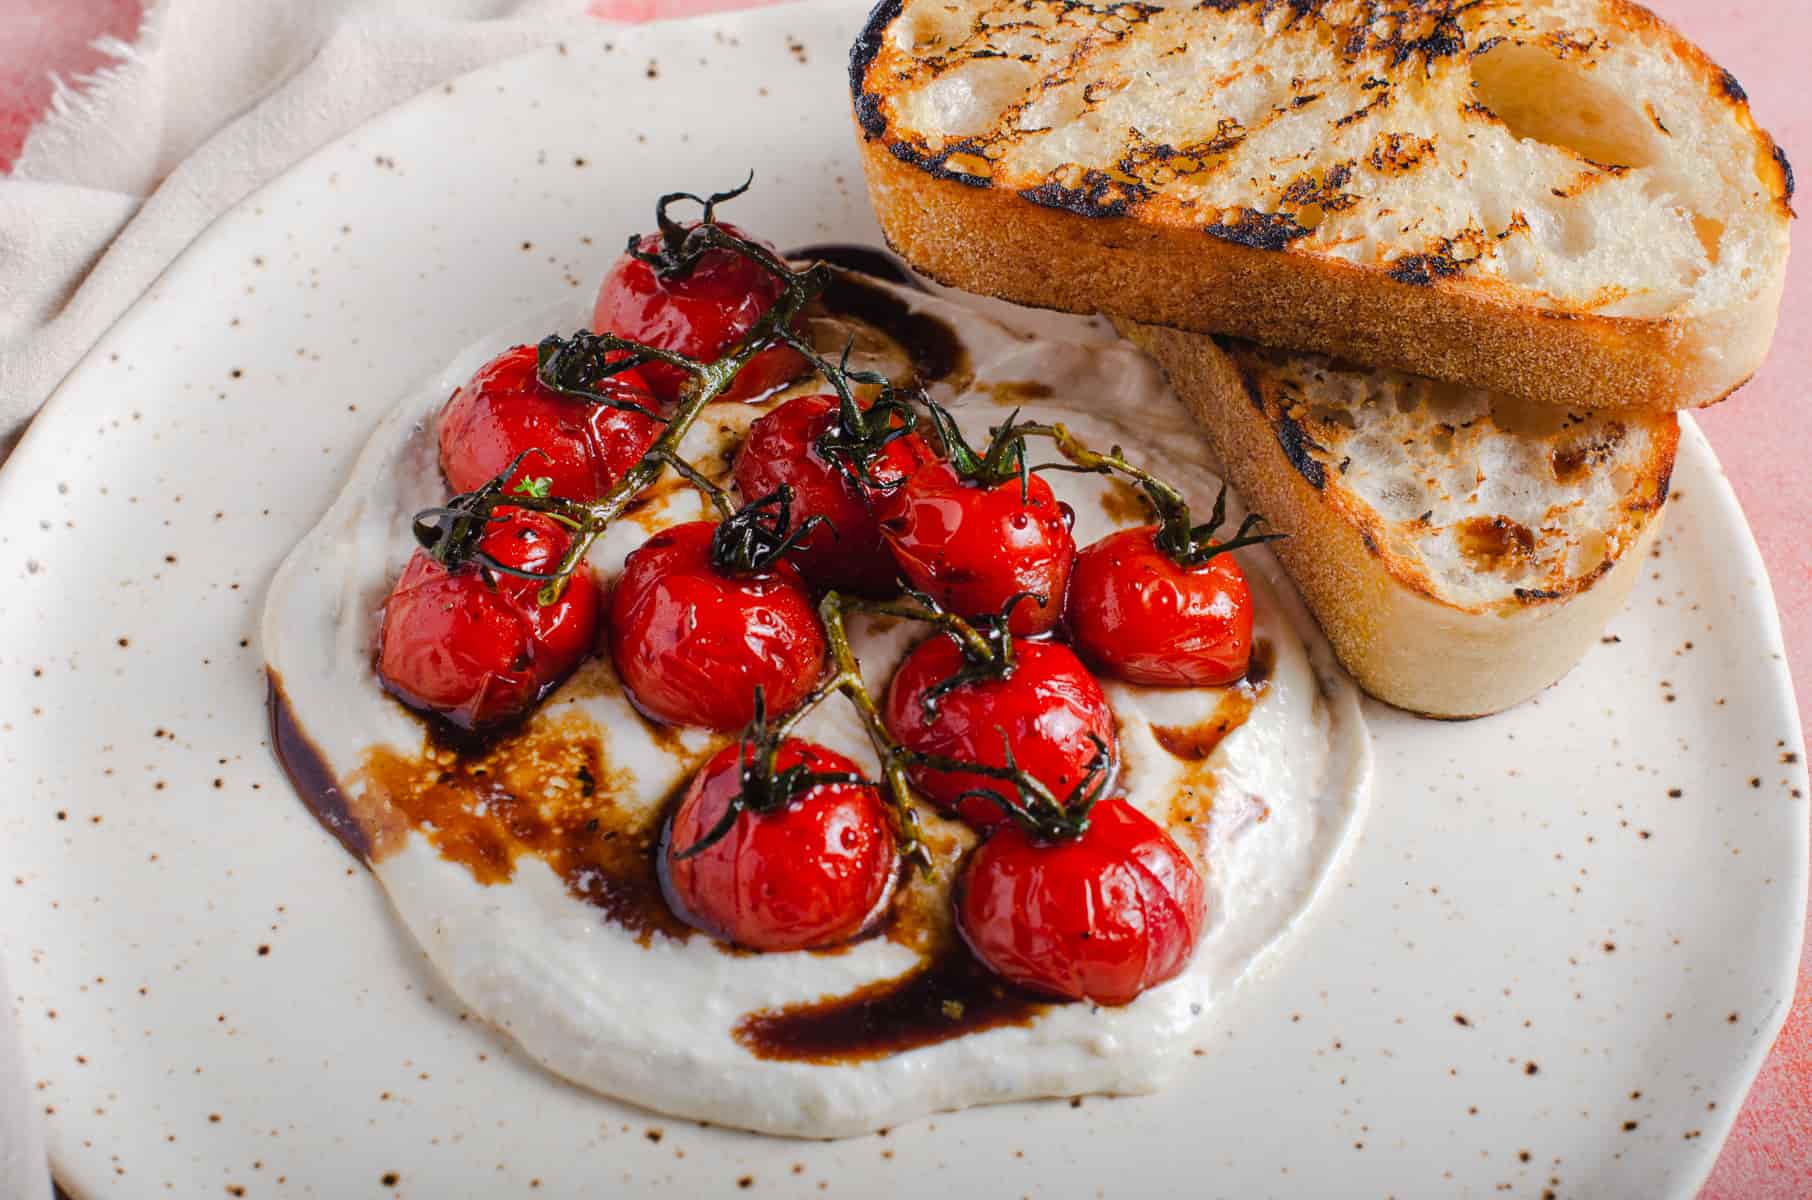 A speckled plate containing whipped feta cheese, oven roasted balsamic glazed vine tomatoes and toasted slices of sourdough bread.